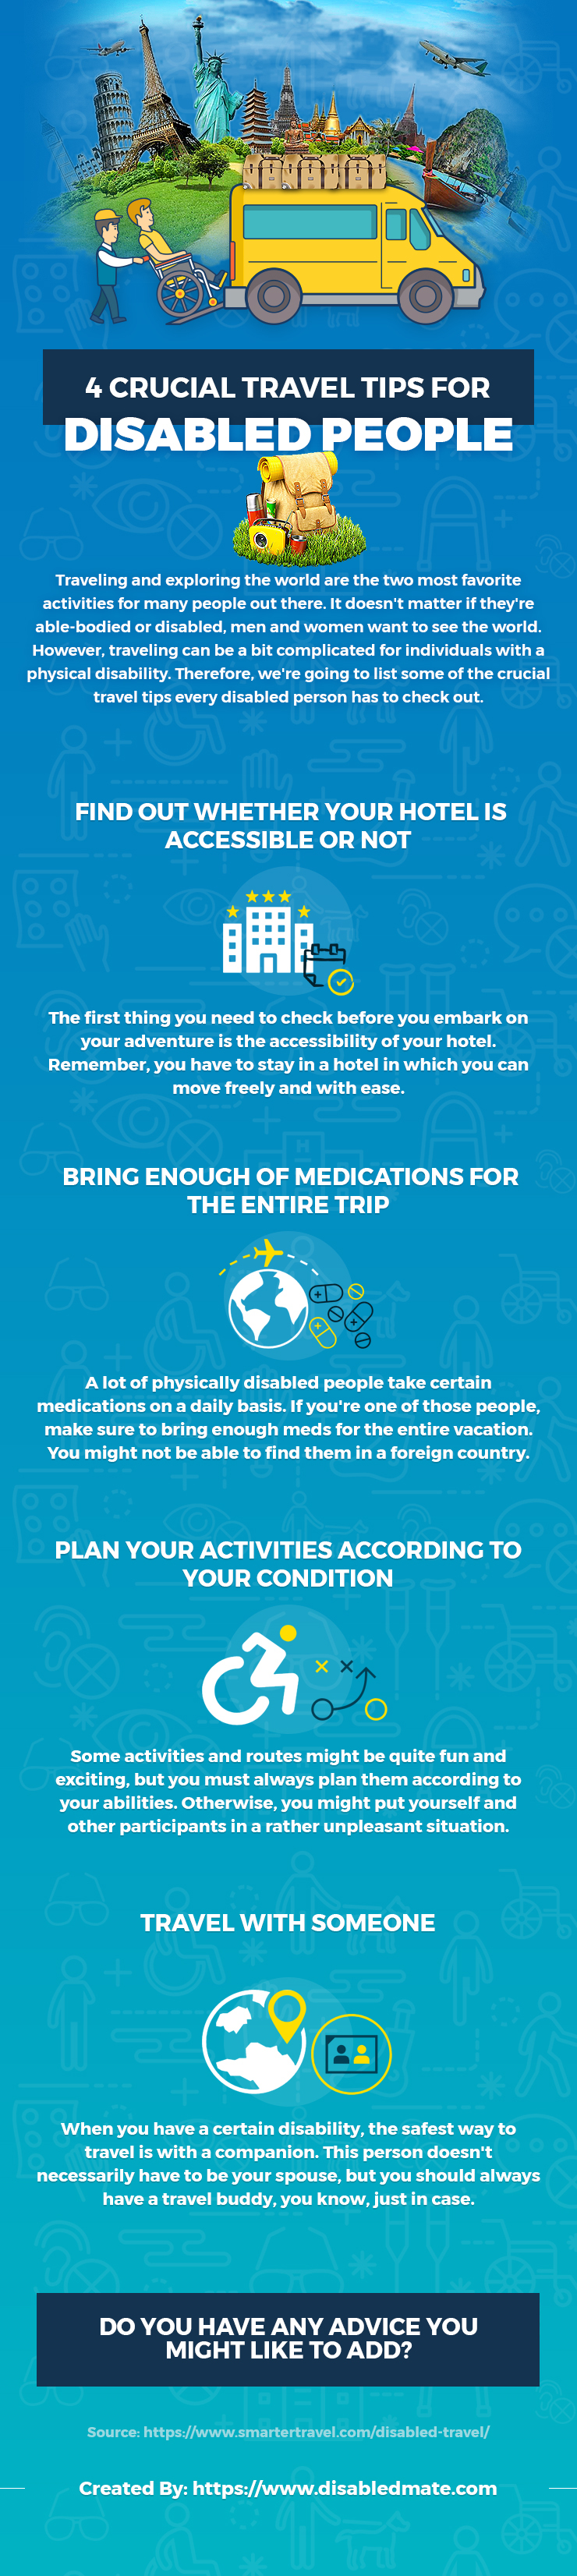 4 Crucial Travel Tips for Disabled People